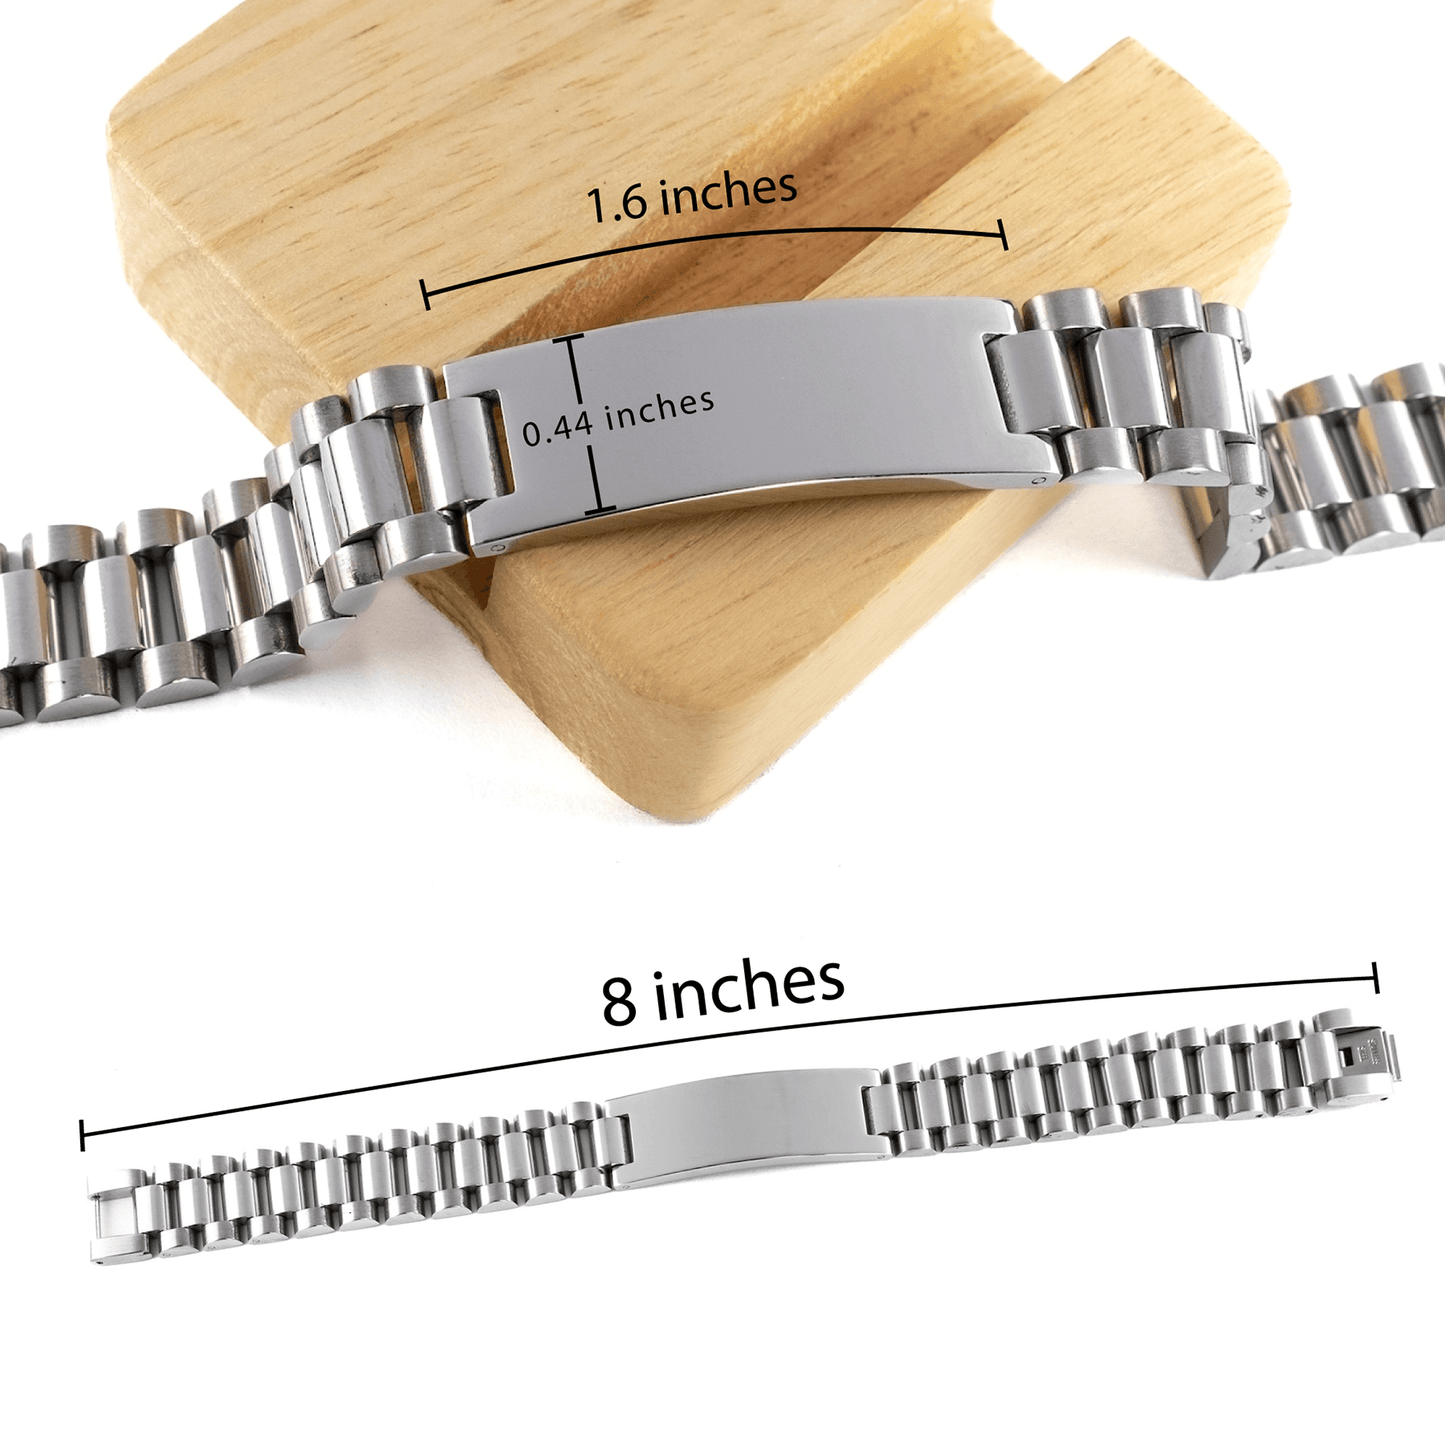 Remarkable Loan Officer Gifts, Your dedication and hard work, Inspirational Birthday Christmas Unique Ladder Stainless Steel Bracelet For Loan Officer, Coworkers, Men, Women, Friends - Mallard Moon Gift Shop